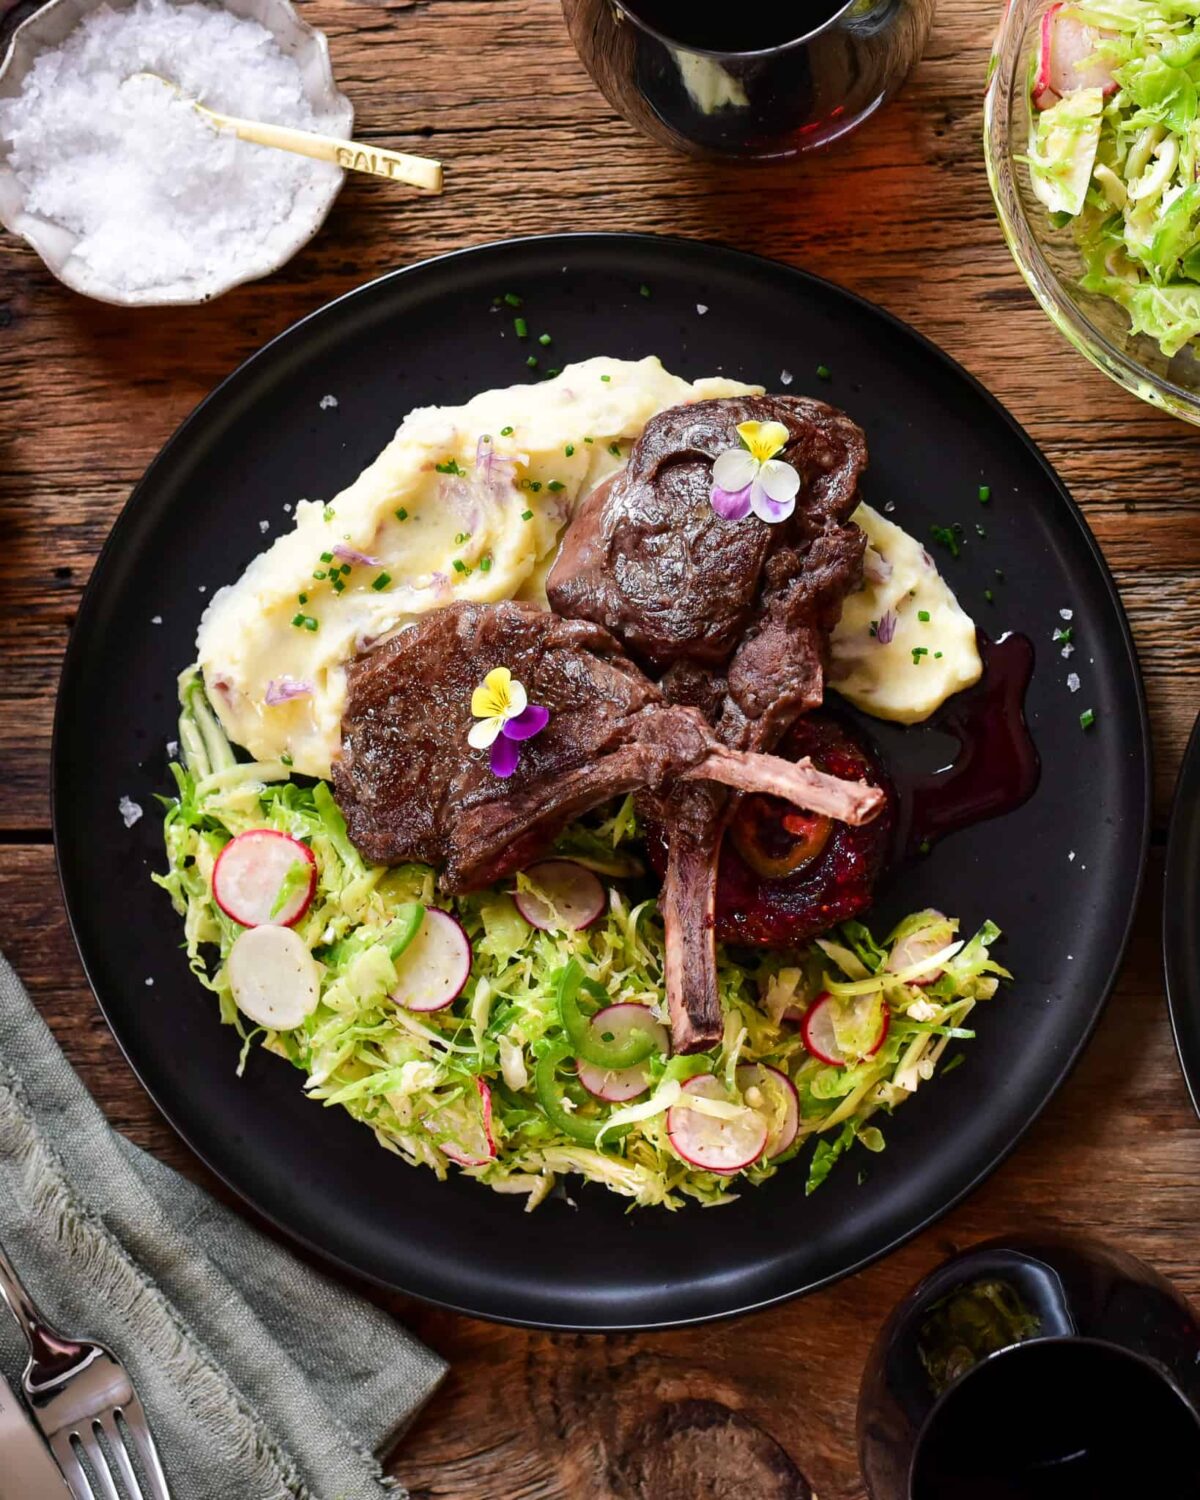 Two venison chops are leaning over mashed potatoes, a brussels sprout slaw alongside and Jalapeño Sauce on a black plate.